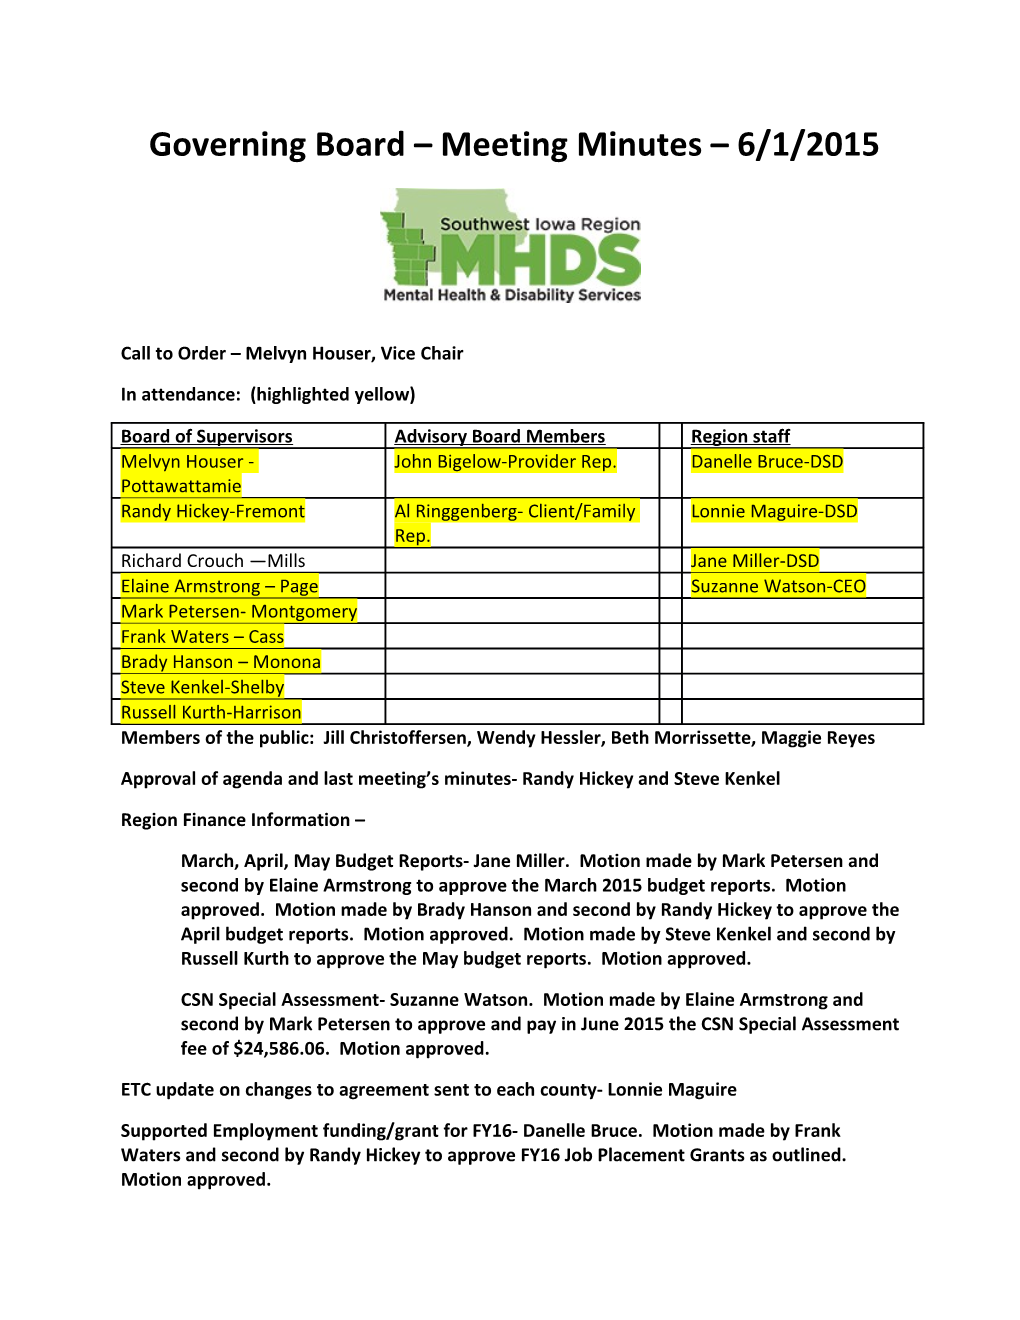 Governing Board Meeting Minutes 6/1/2015